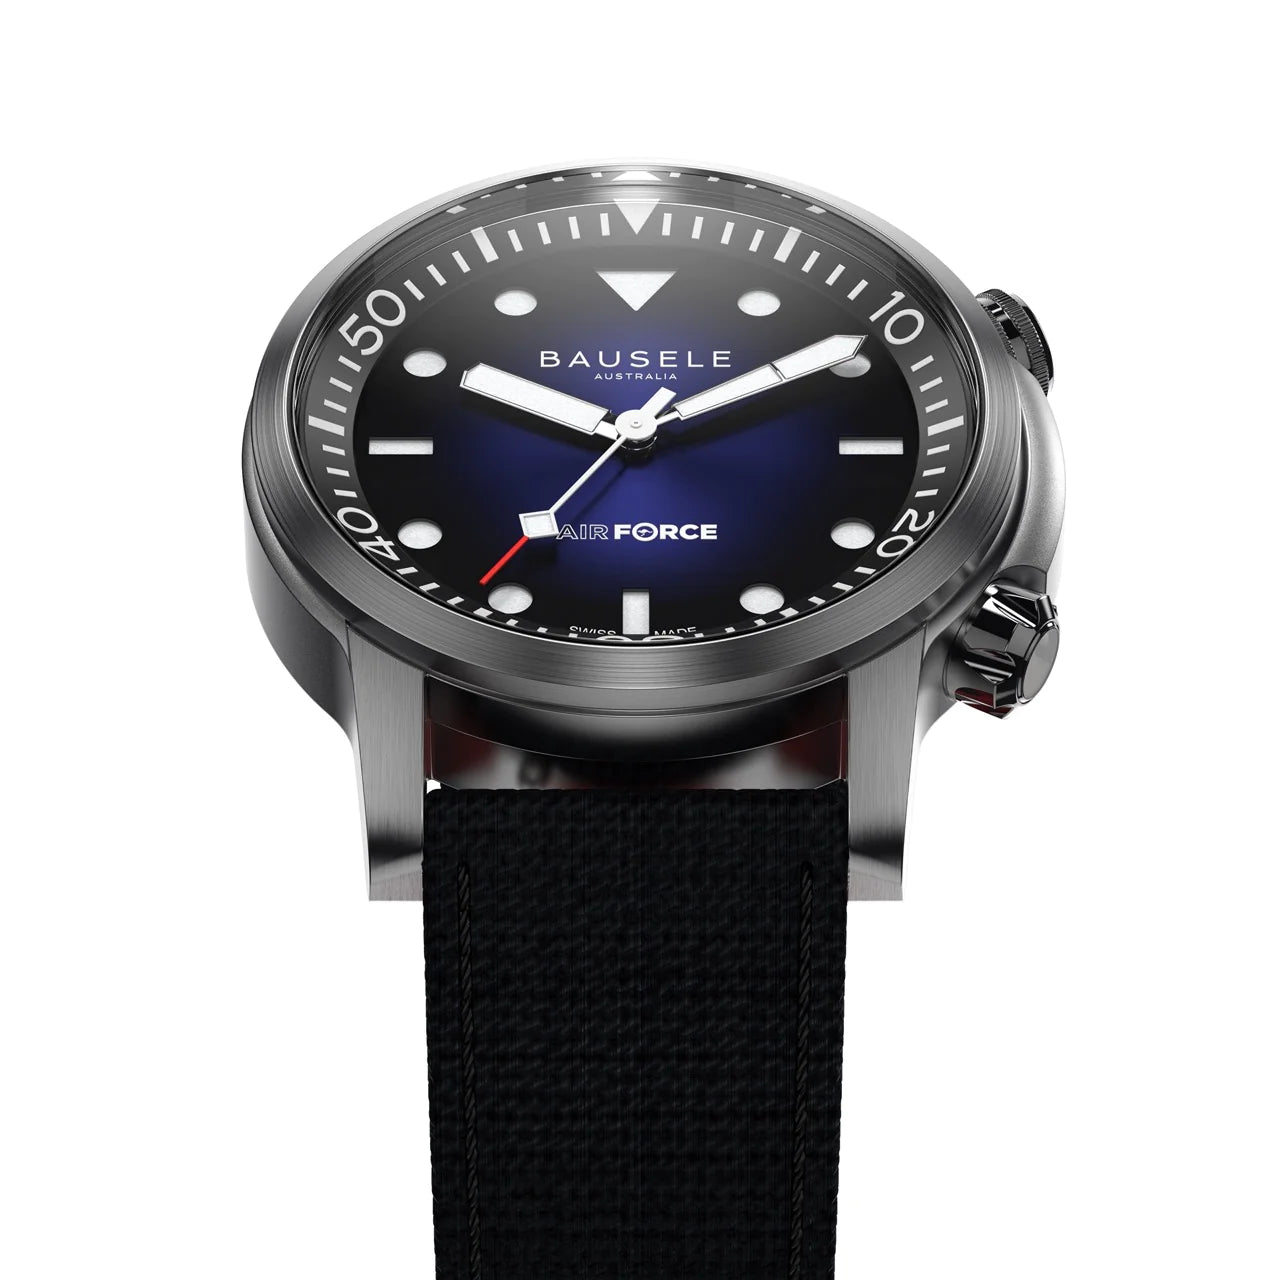 BAUSELE AIR FORCE 5th GENERATION LIMITED EDITION